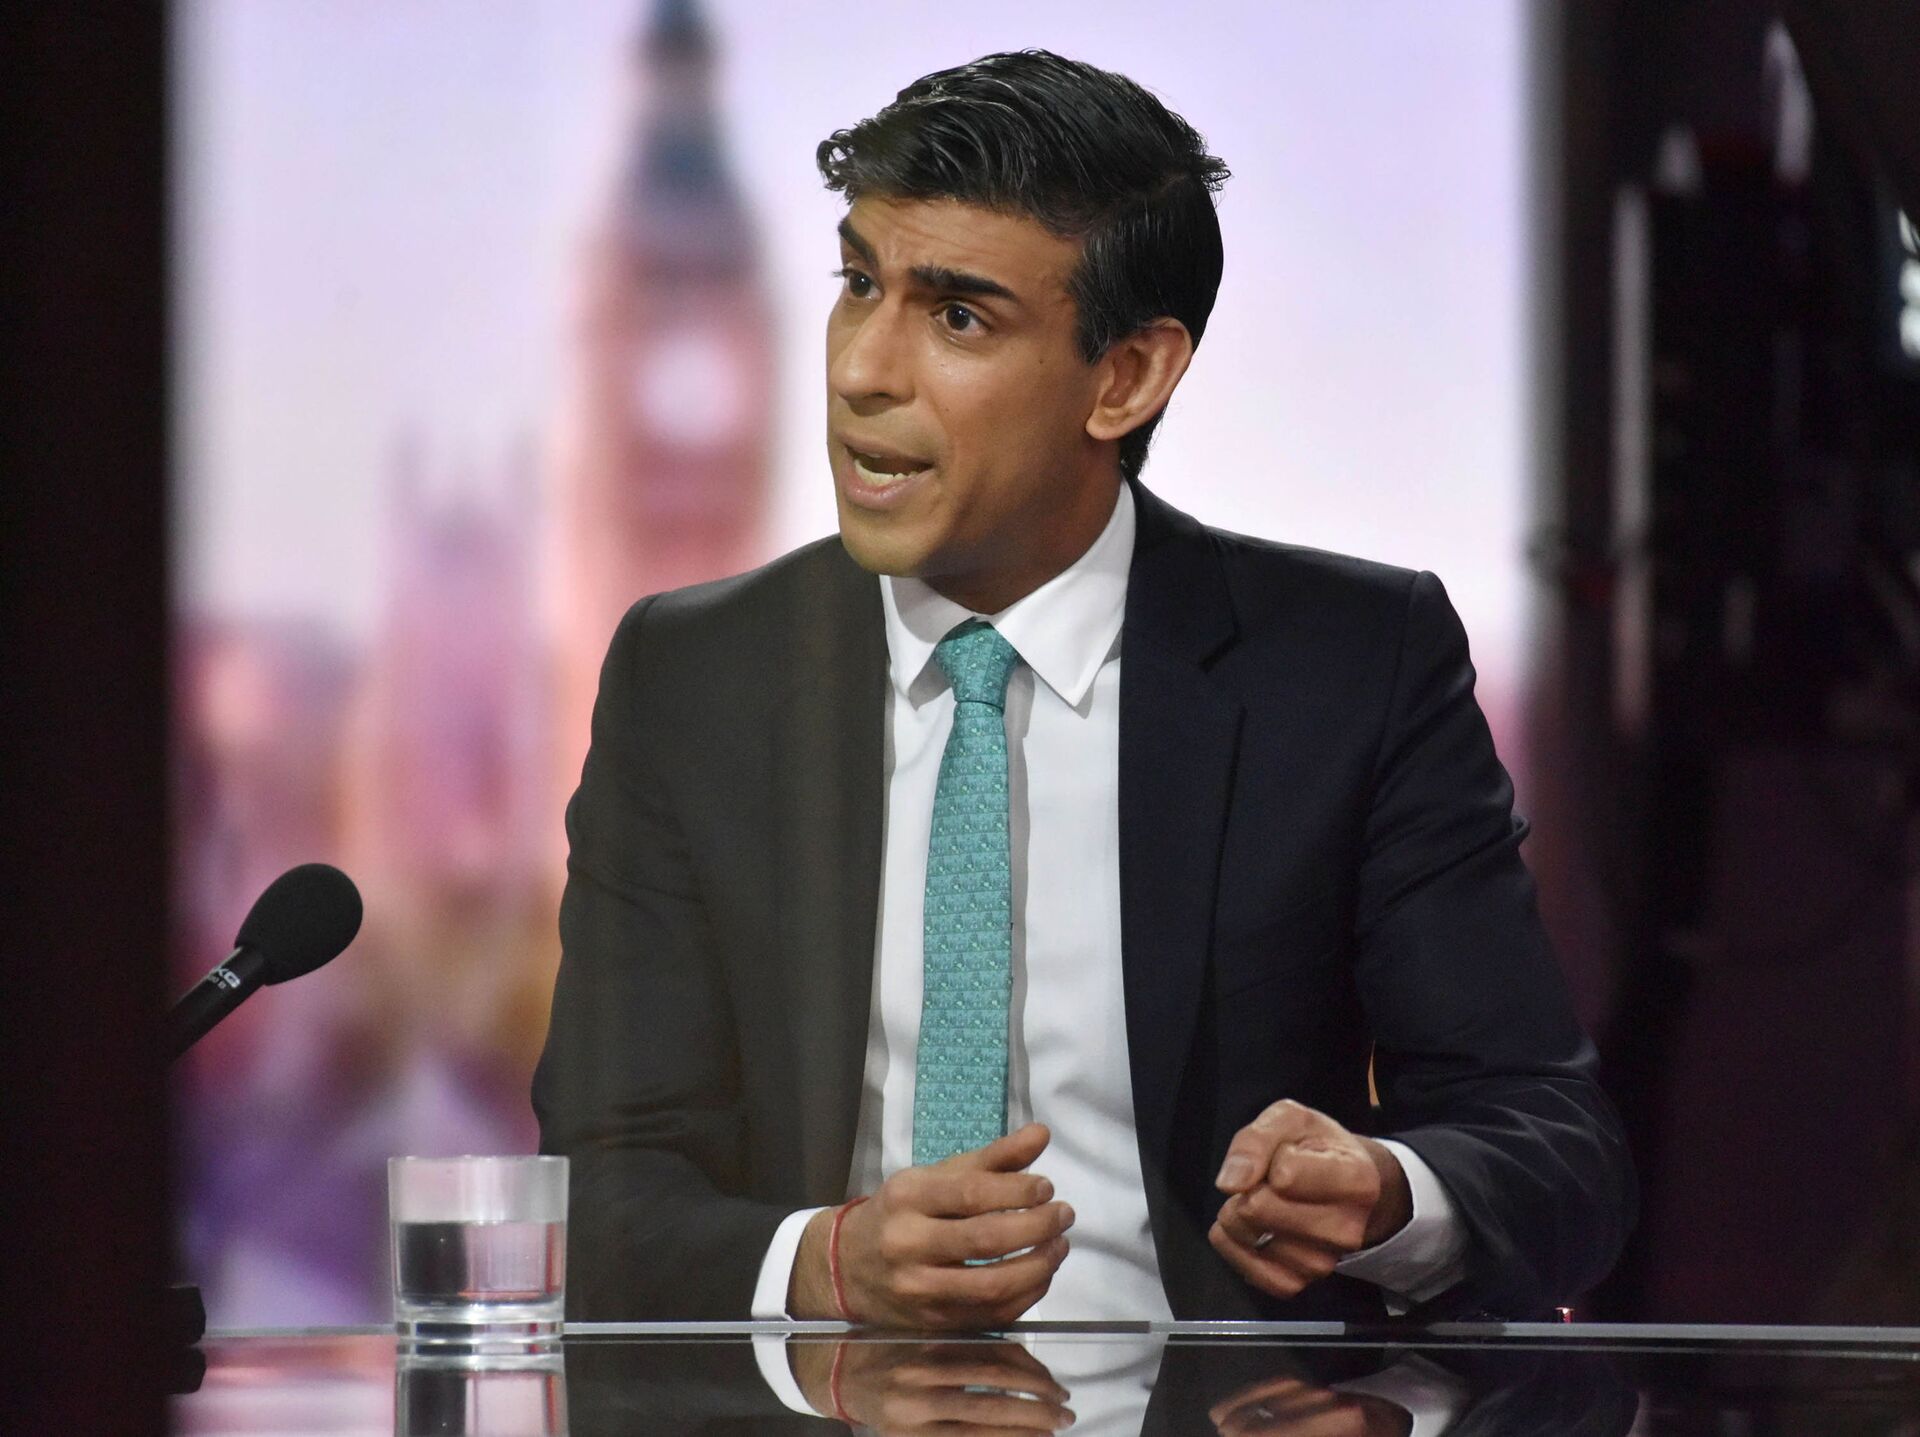 Britain's Chancellor of the Exchequer Rishi Sunak speaks on BBC TV's The Andrew Marr Show - Sputnik International, 1920, 07.09.2021